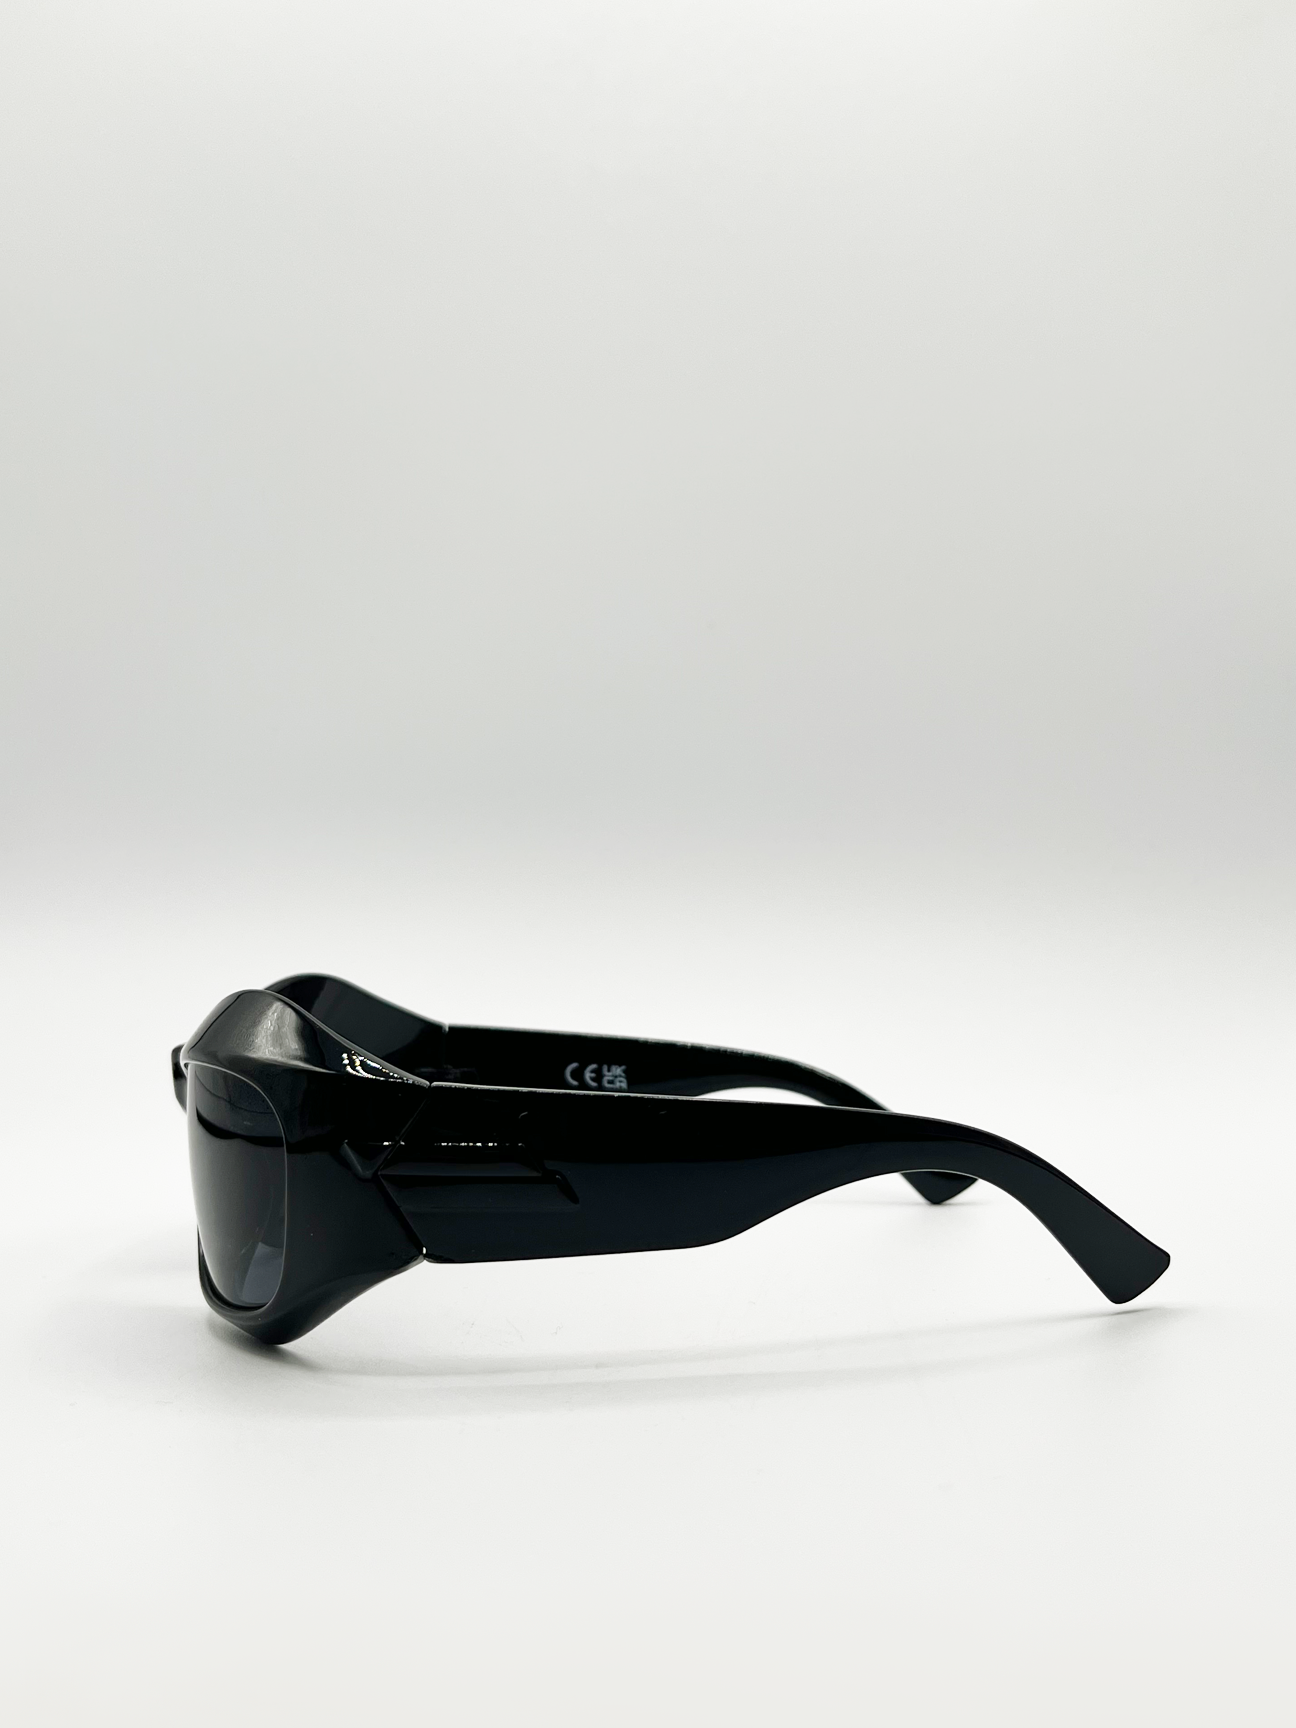 Shiny Black Exaggerated Brow Racer Style Sunglasses with Black Lenses